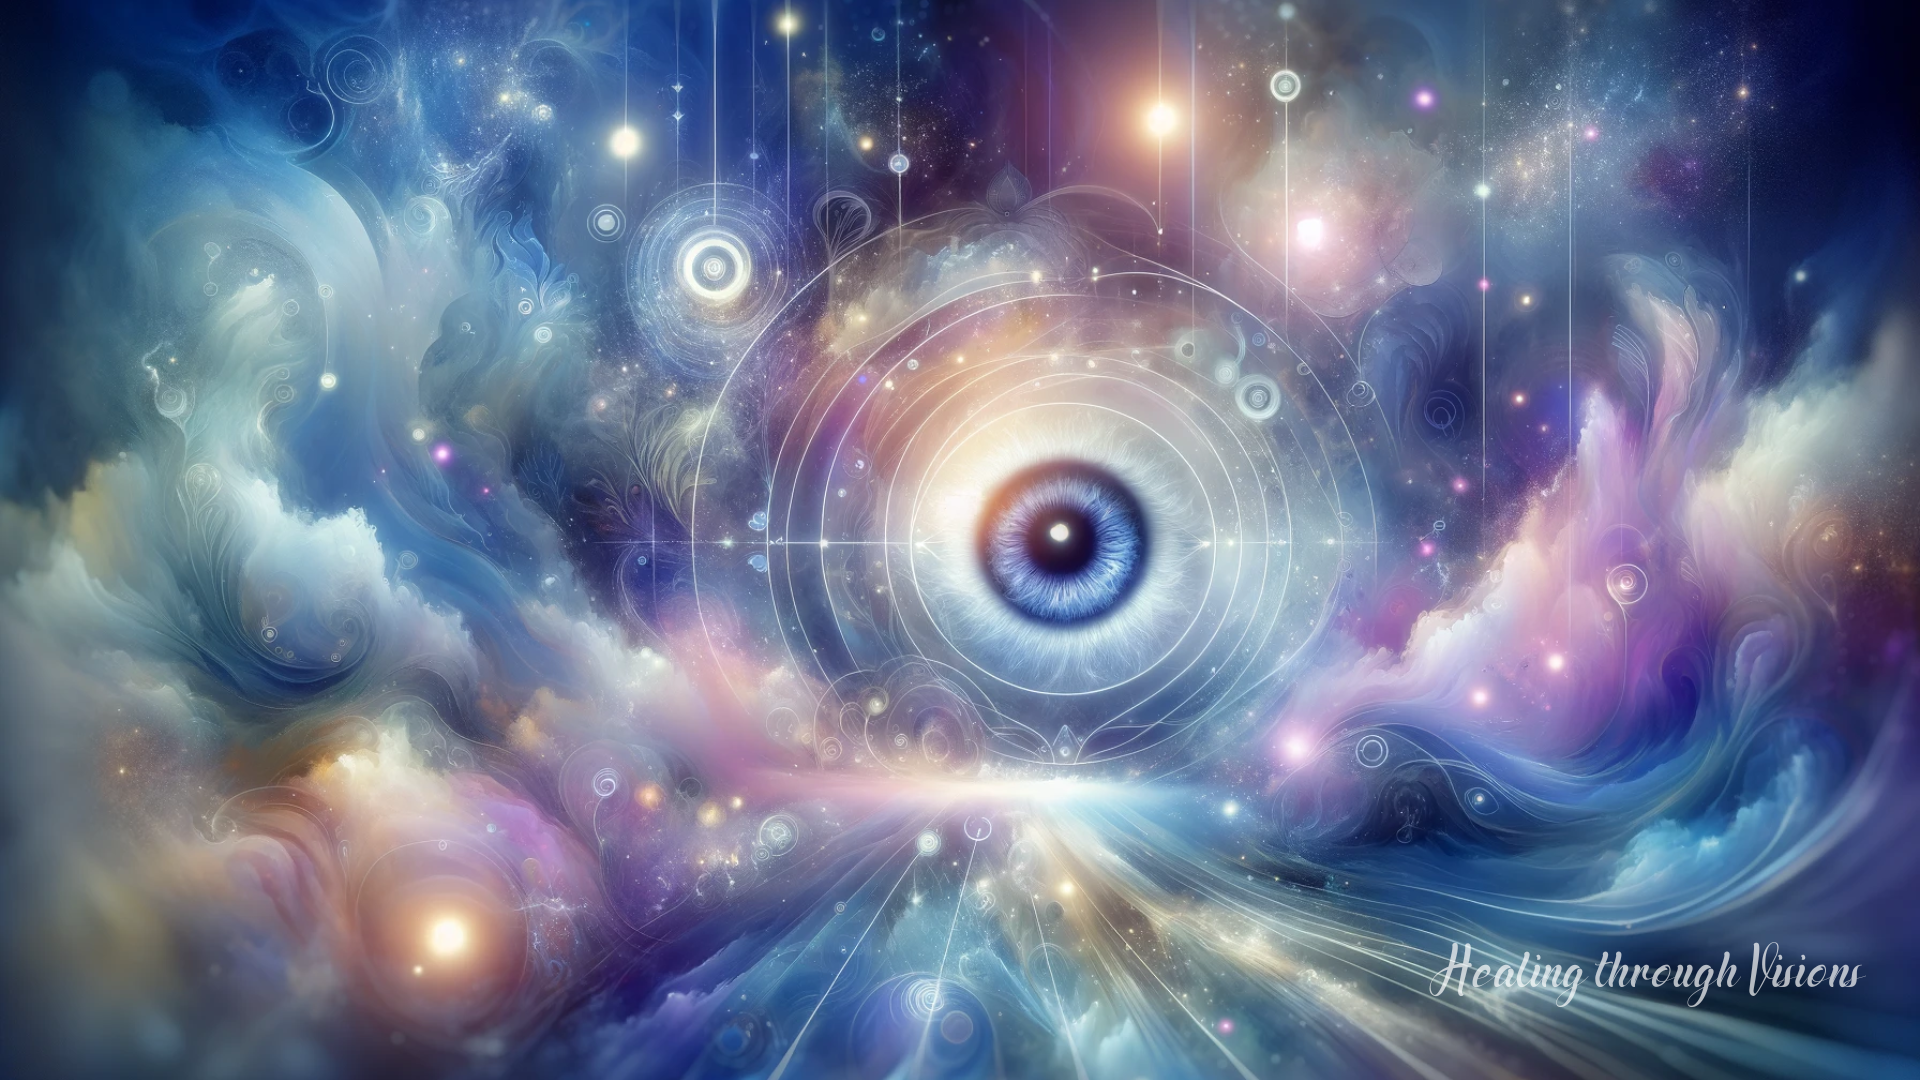 An ethereal, visually inspiring artwork symbolizing intuition and psychic abilities. The image features abstract and mystical elements, incorporating symbols like an eye, glowing lights, and ethereal landscapes, all blended in a dreamy, surreal style. The color palette is soothing yet vibrant, with blues, purples, and soft whites, creating a sense of otherworldly calm and wisdom. The composition evokes a sense of deep connection to the unseen world, perfect for capturing attention at the beginning of a post about clair- abilities.